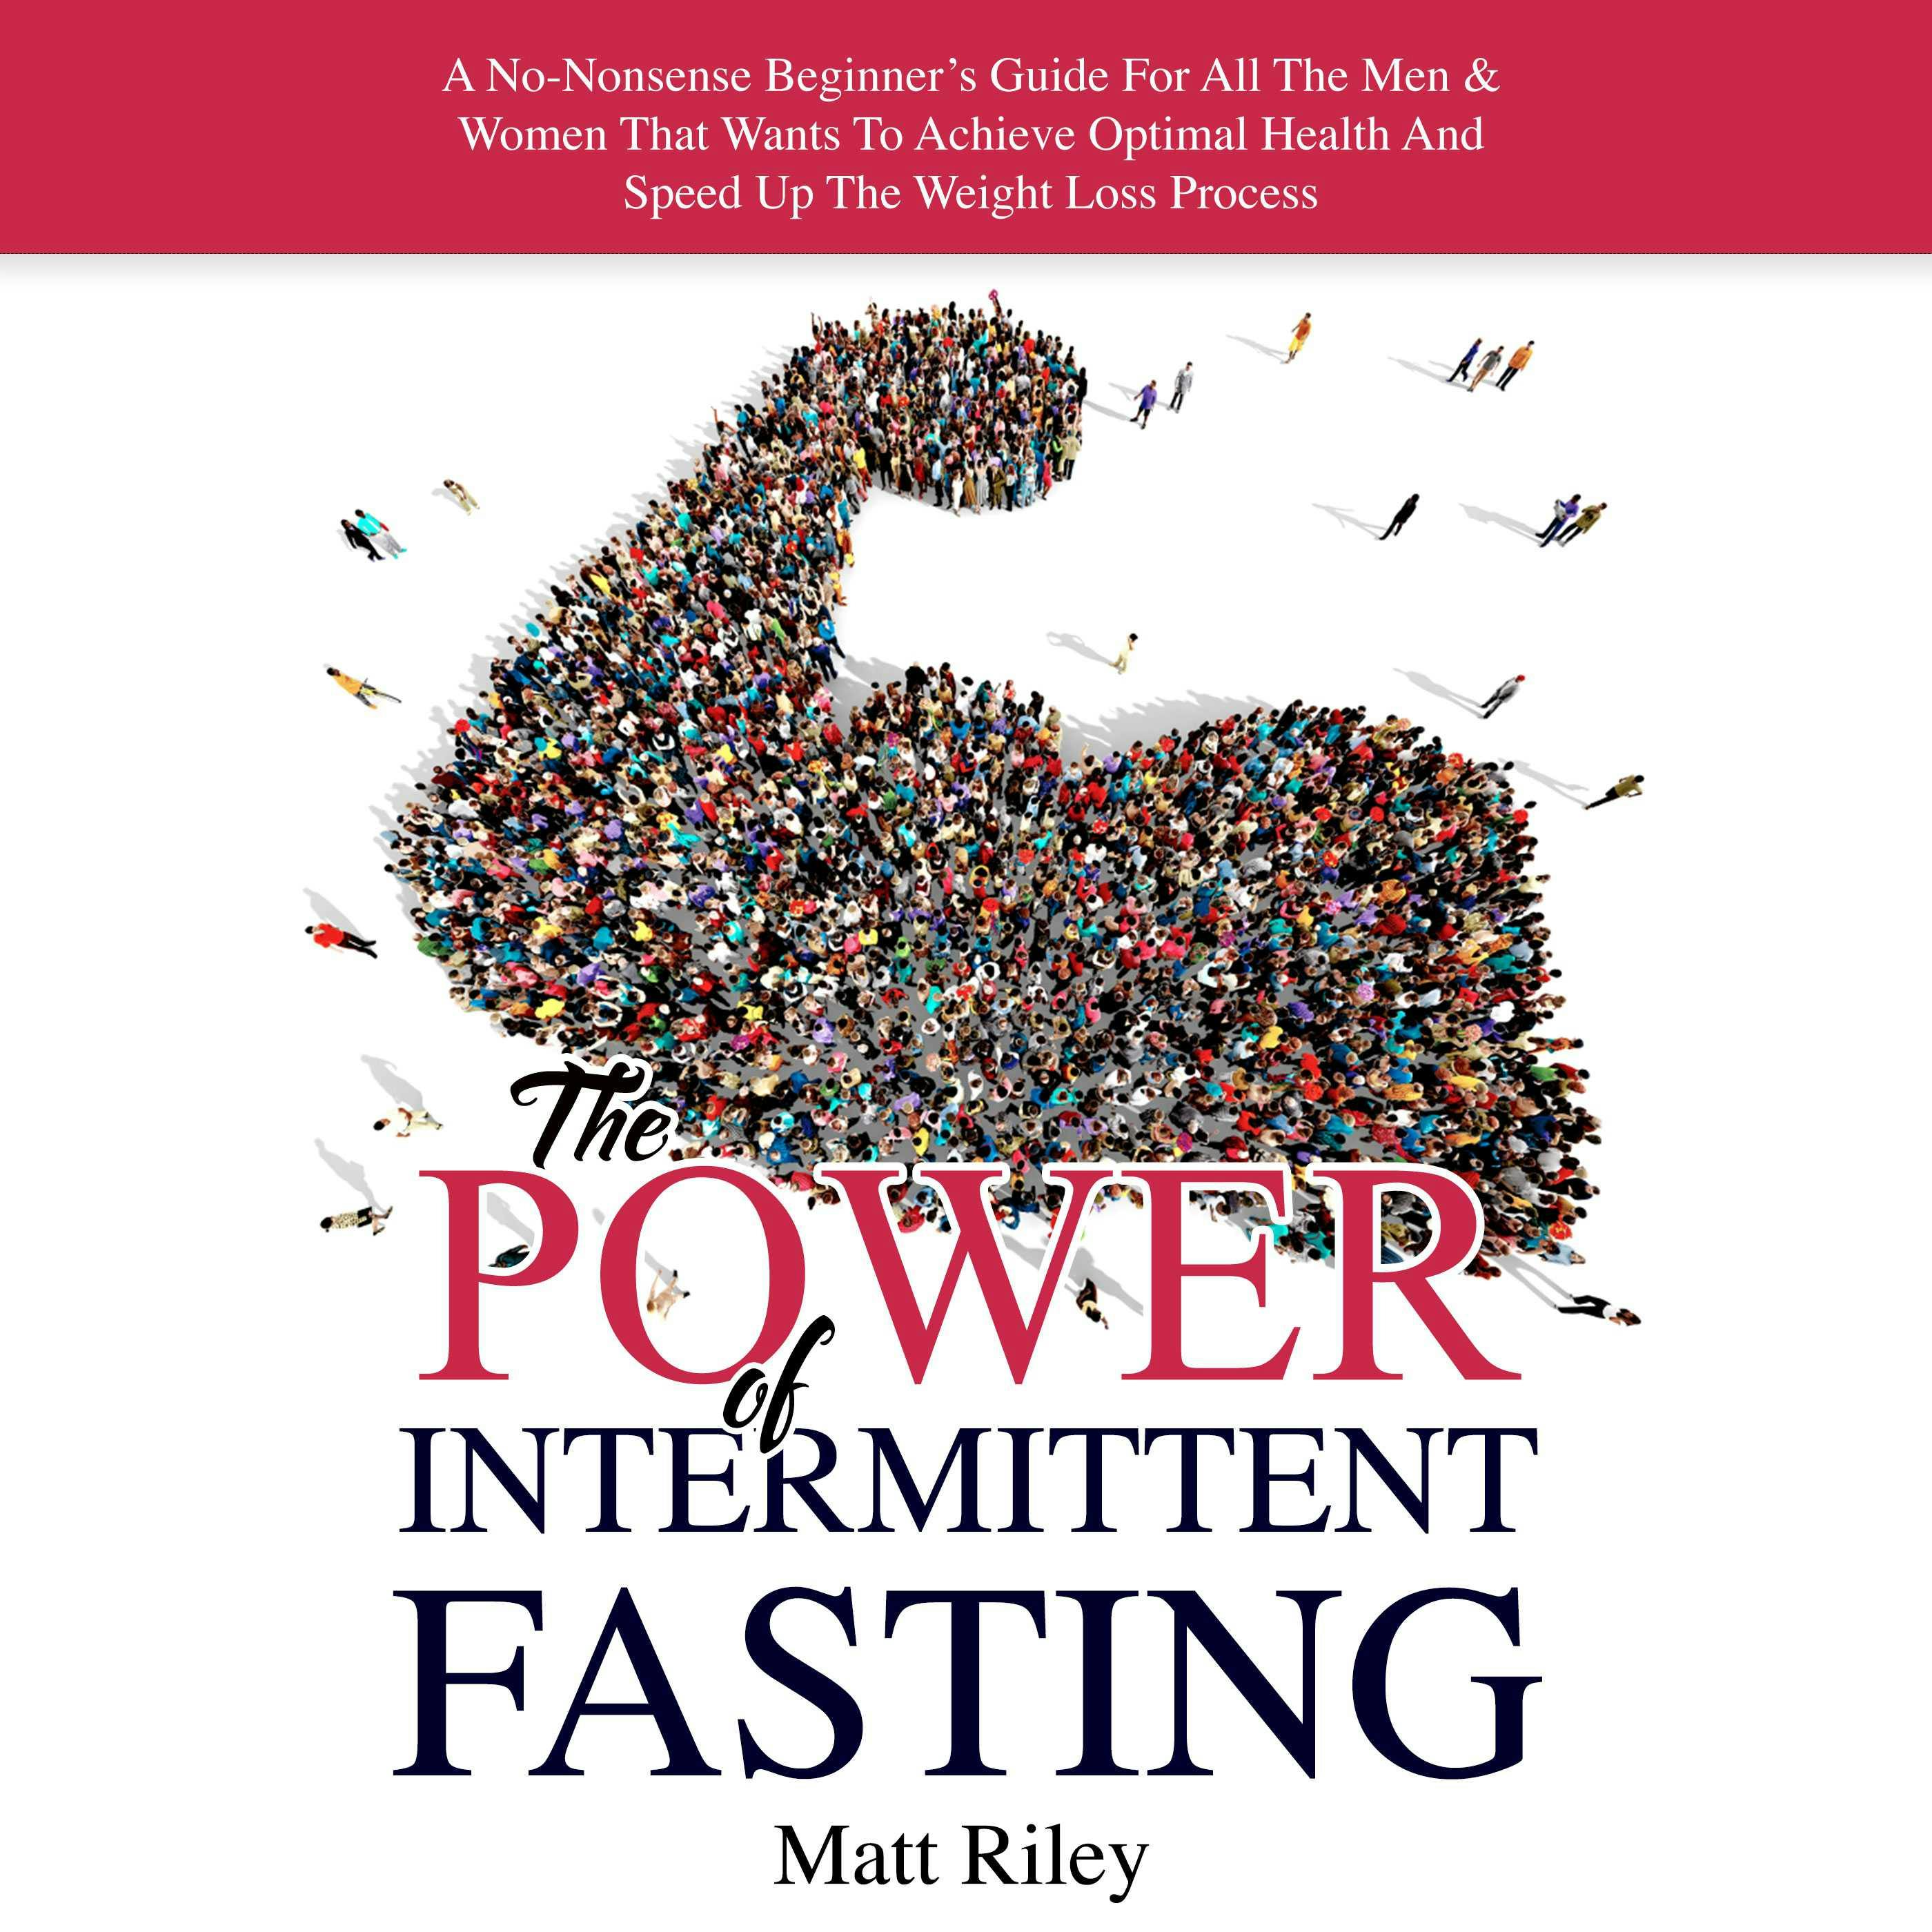 The Power Of Intermittent Fasting: A No-Nonsense Beginner's Guide For All The Men & Women That Wants To Achieve Optimal Health And Speed Up The Weight Loss Process - undefined